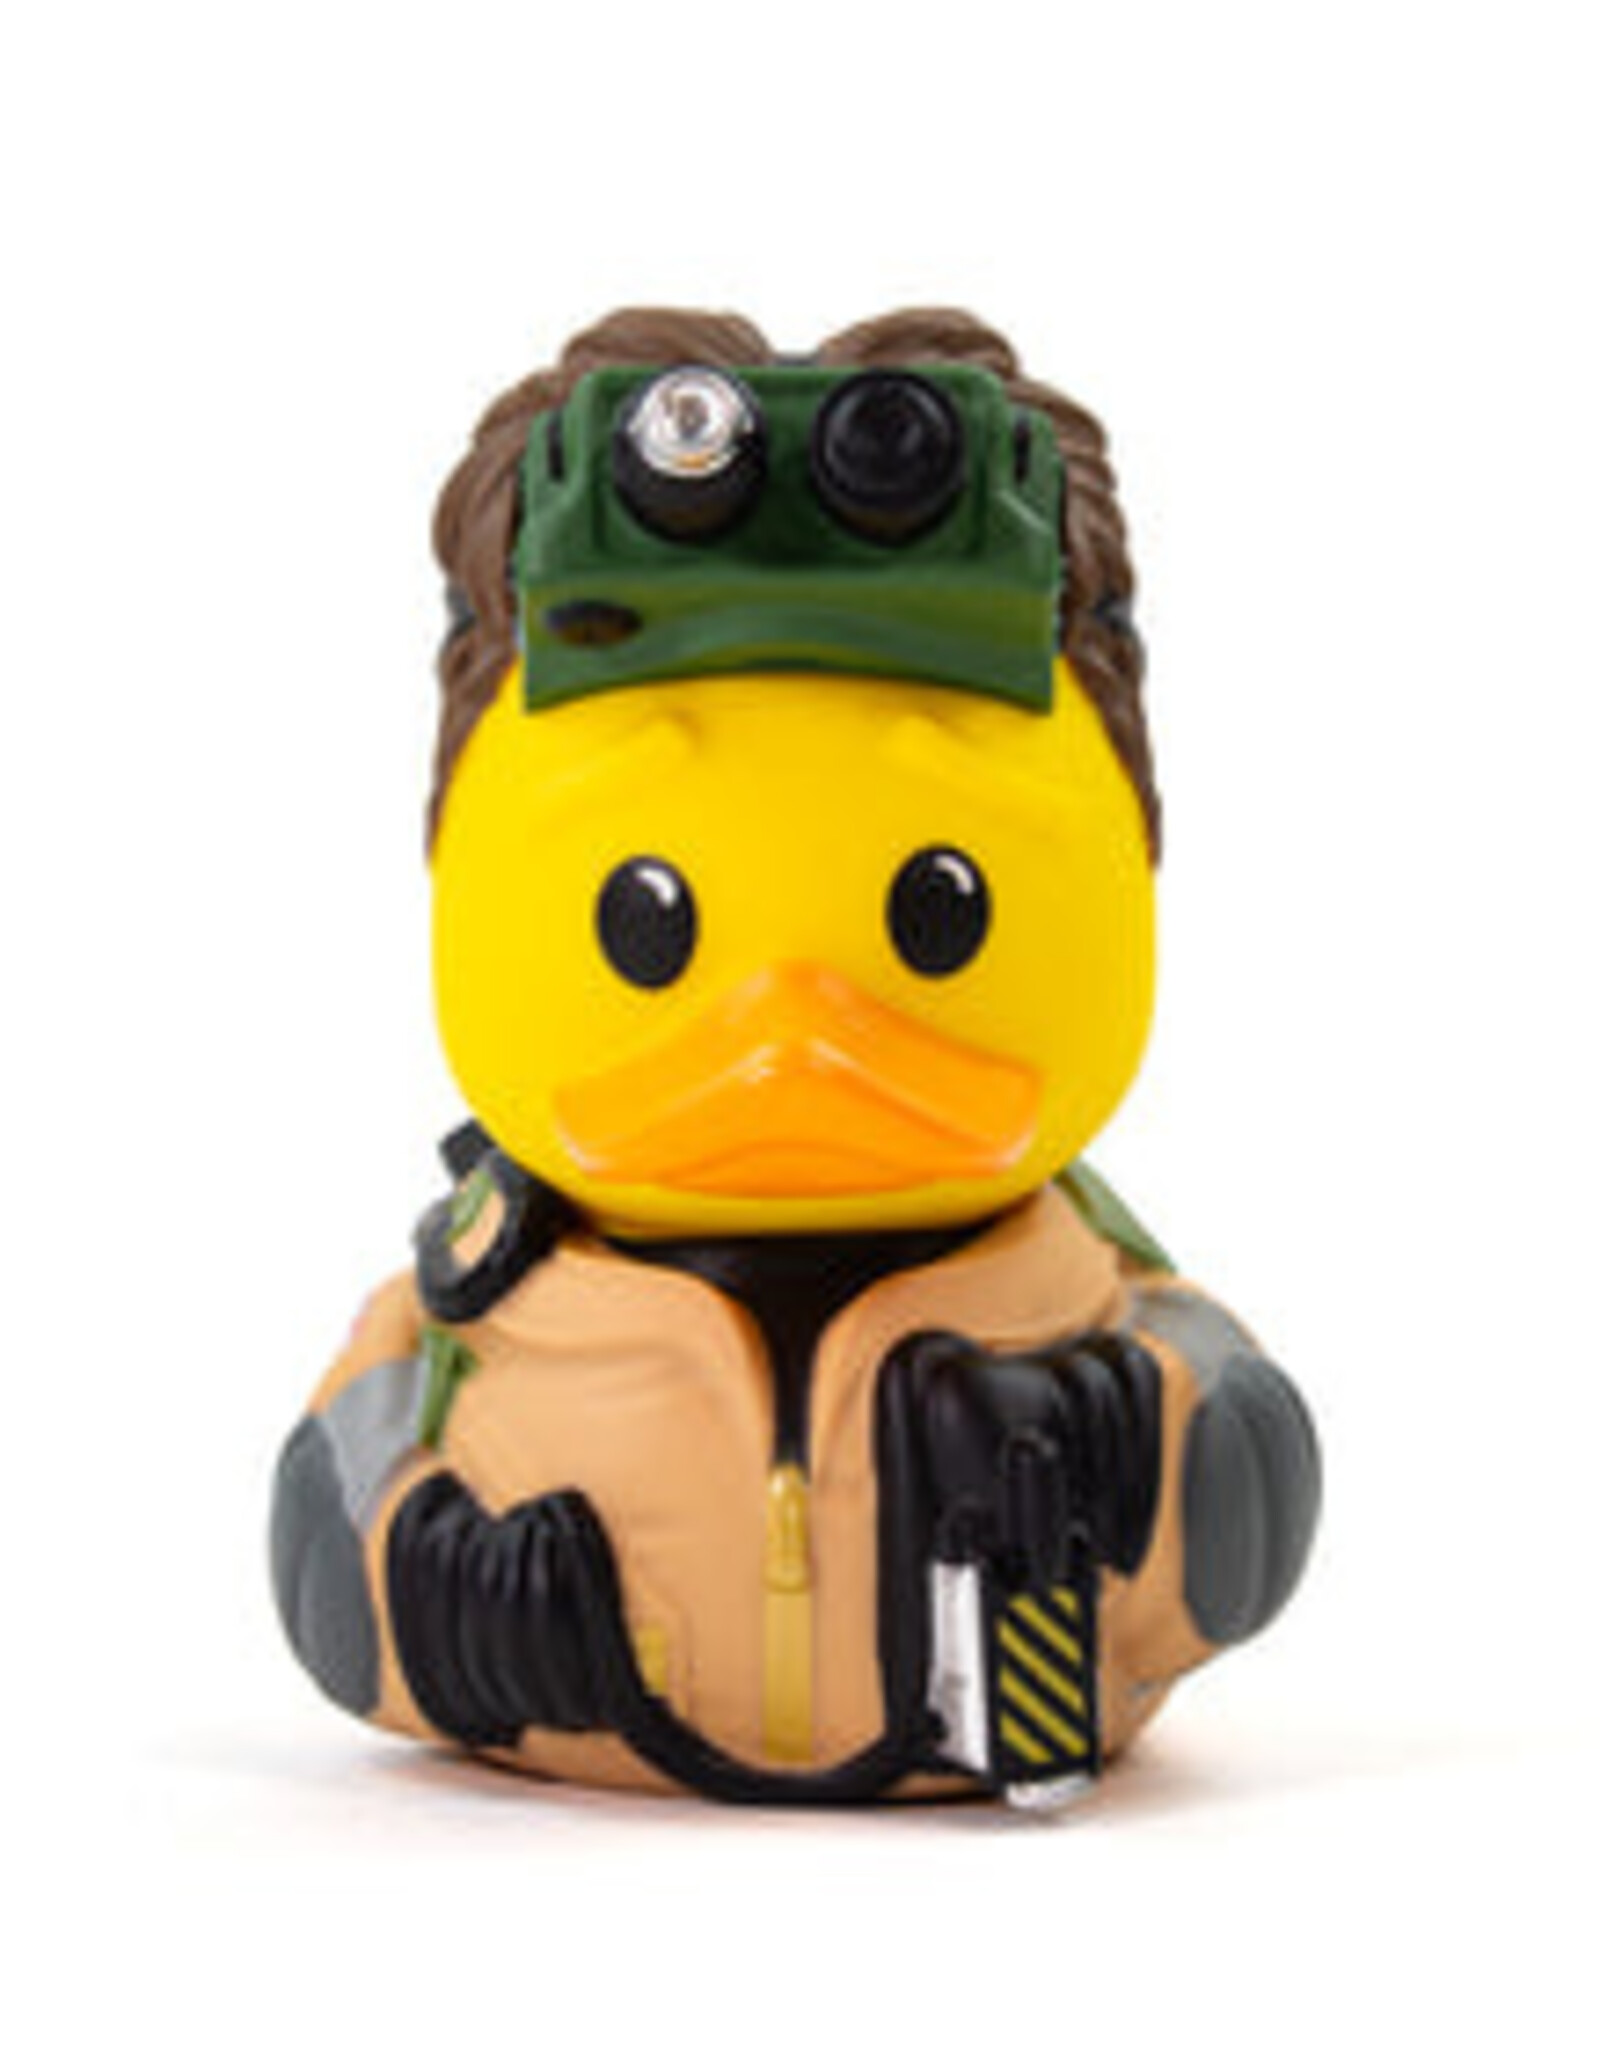 Tubbz Ghostbusters Ray Stantz Rubber Duck